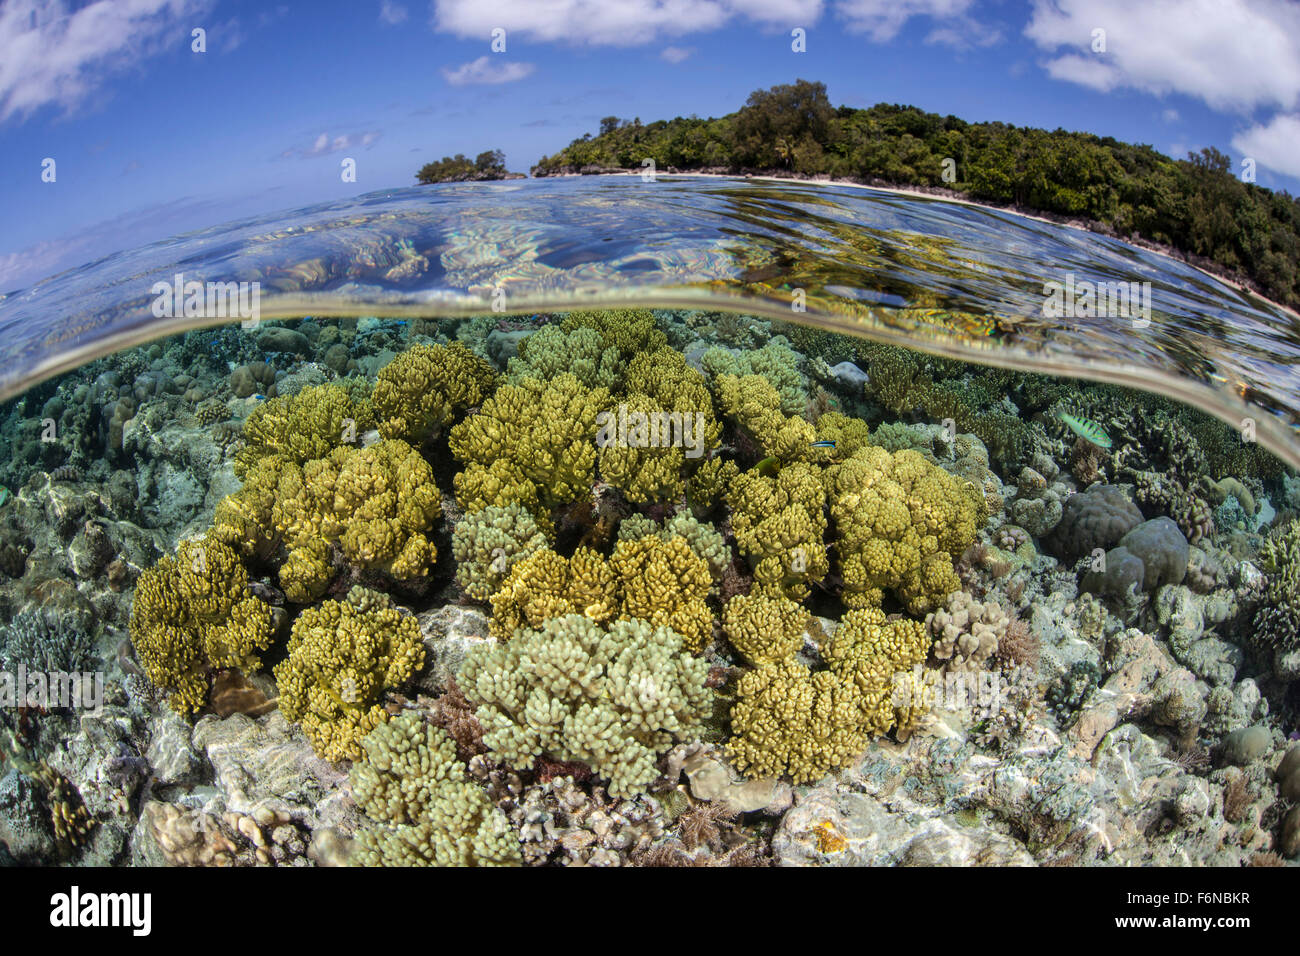 Soft corals grow on a shallow reef flat on the edge of Palau's barrier ...